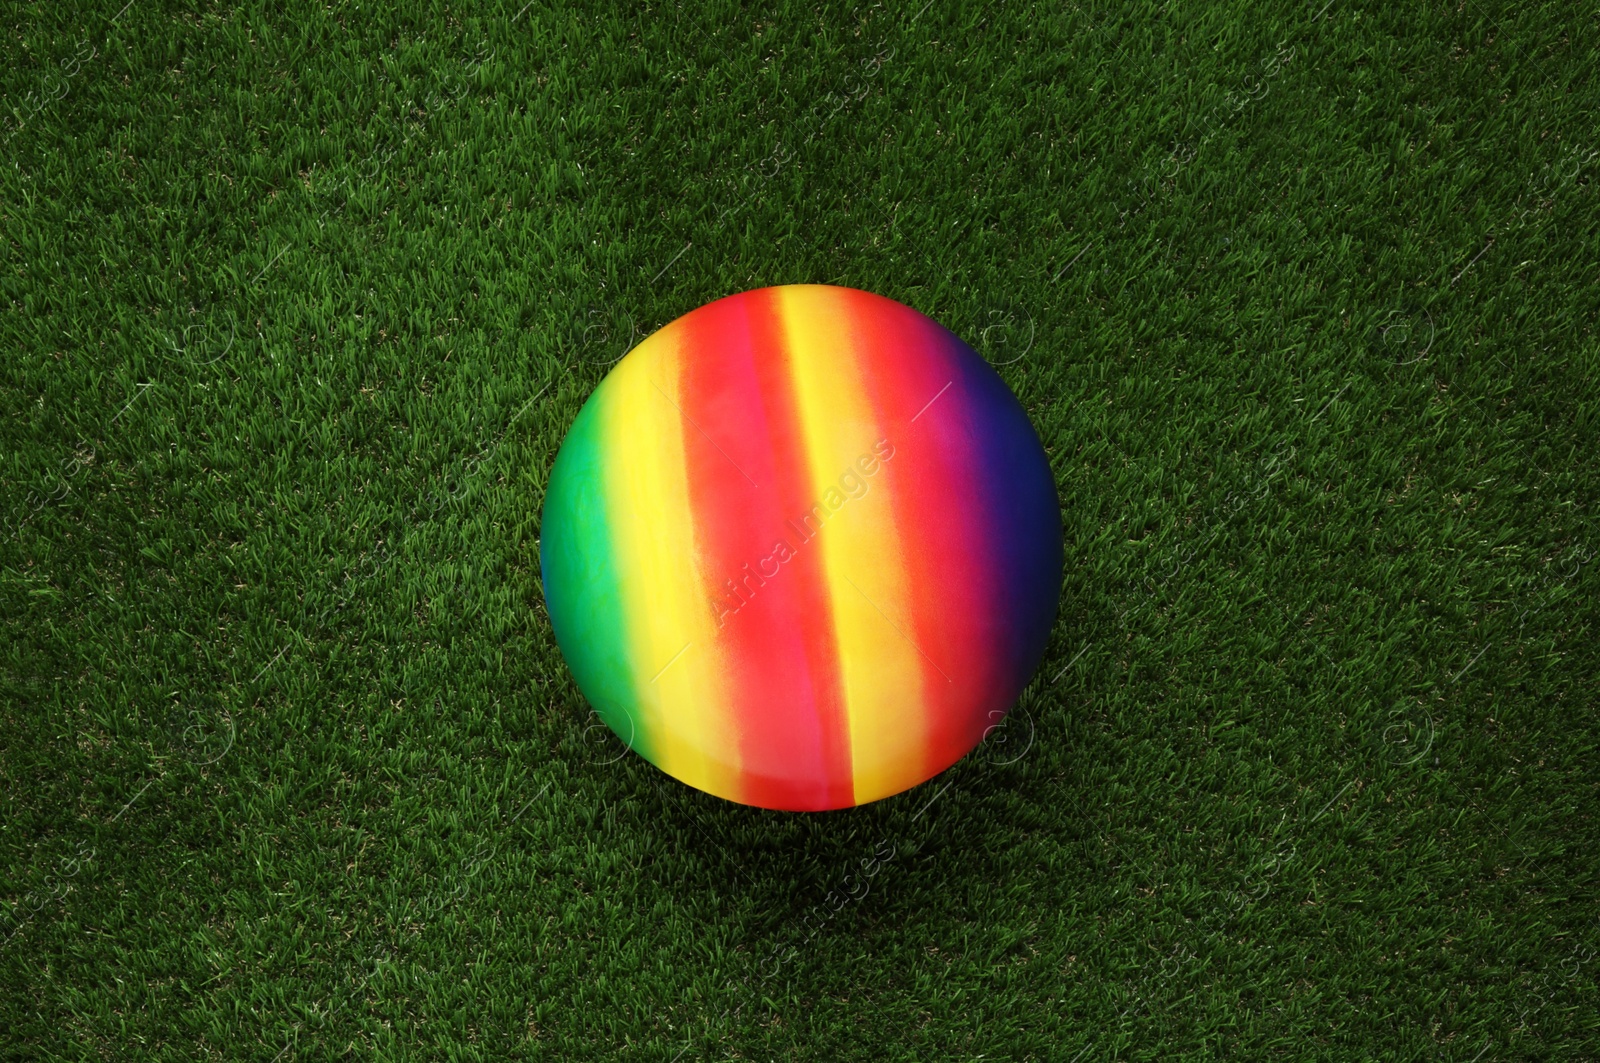 Photo of New bright kids' ball on artificial green grass, top view